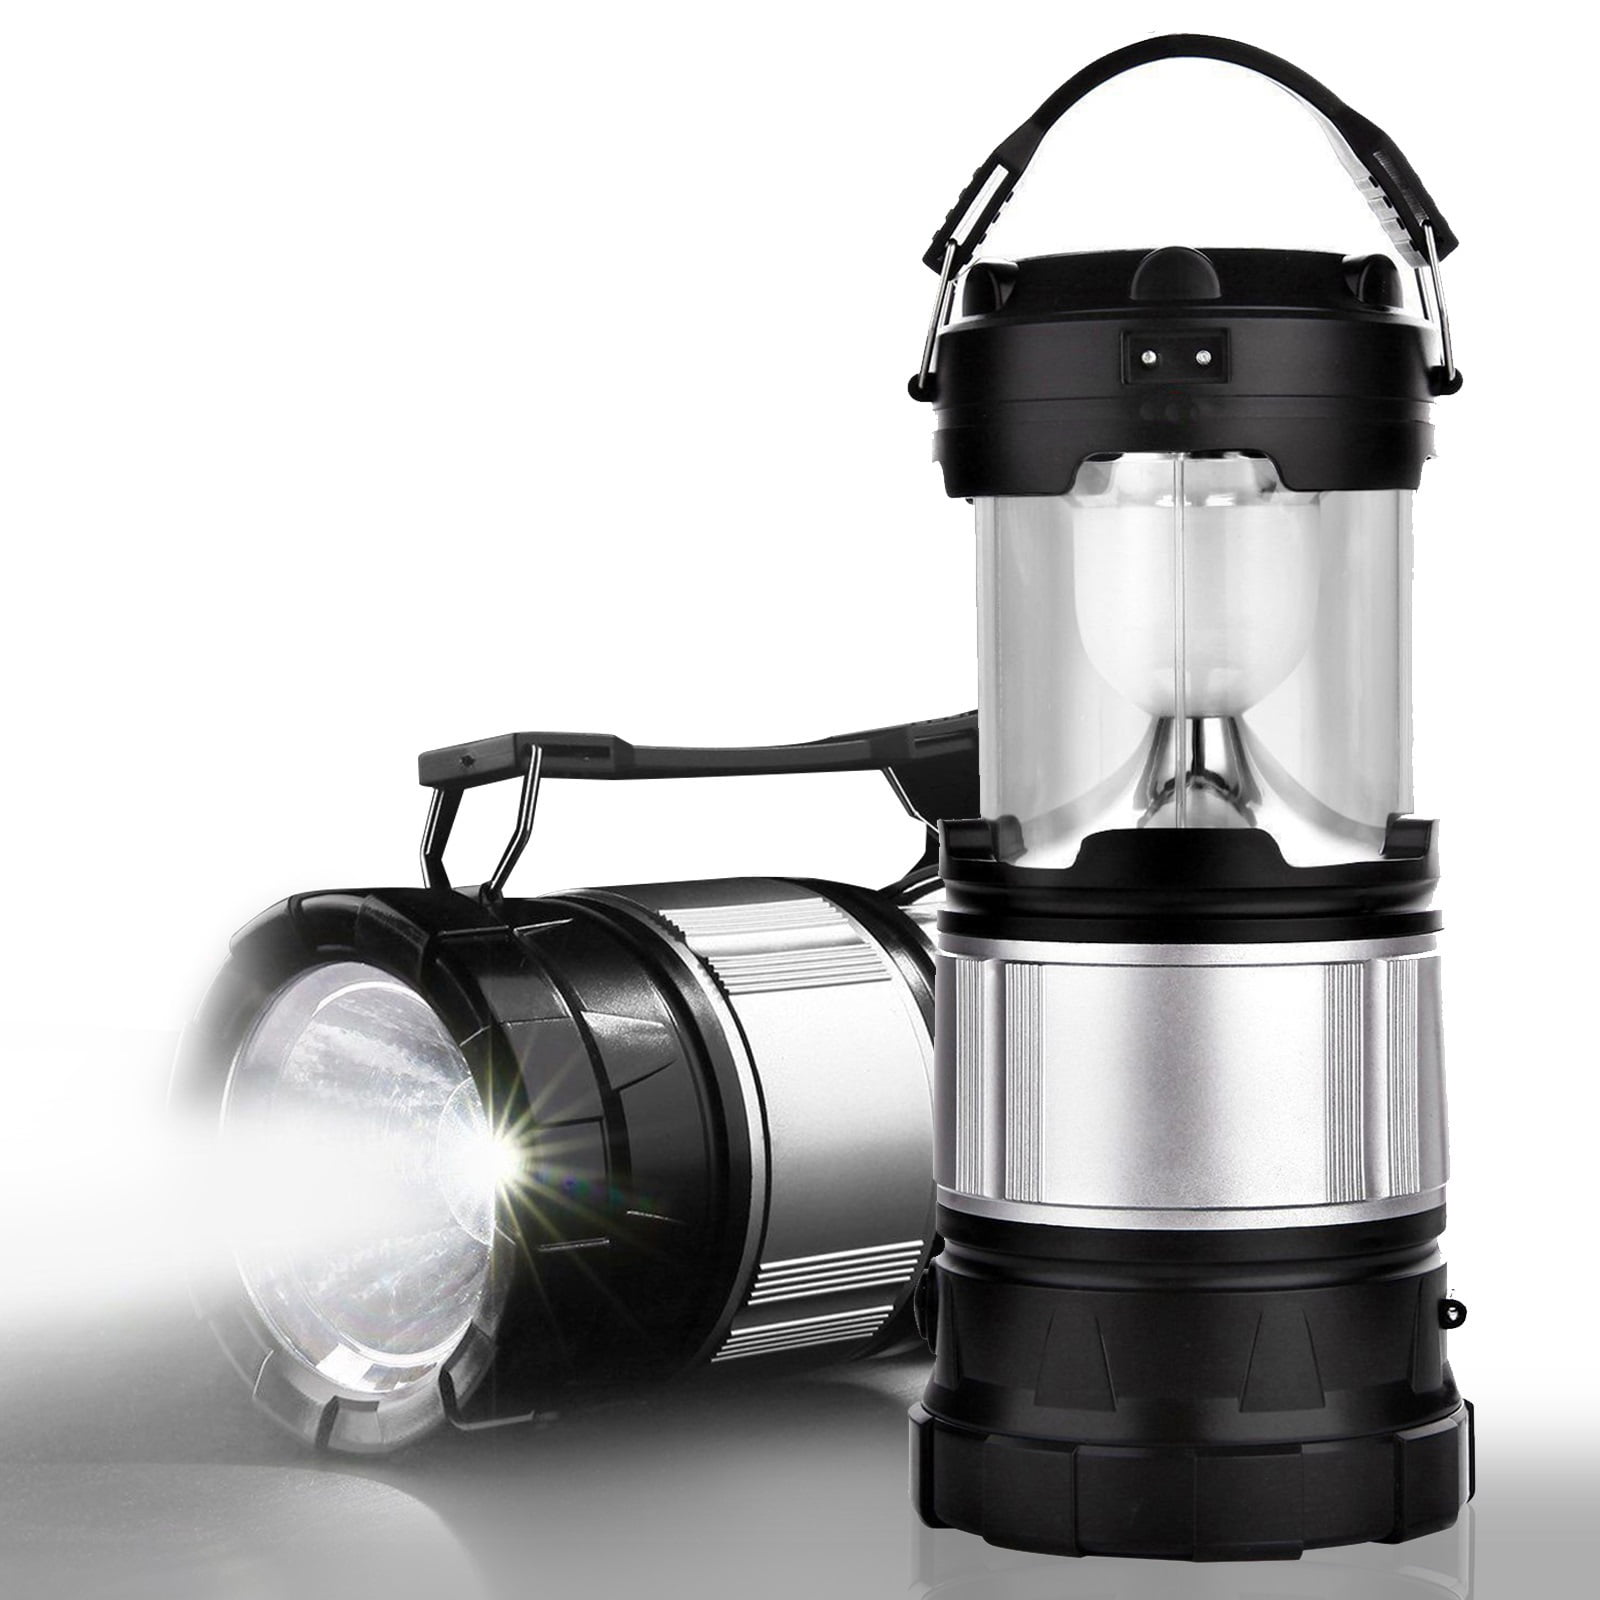 Details about   LED Camping Fishing Lantern No Batteries Required Crank Power or Solar Power